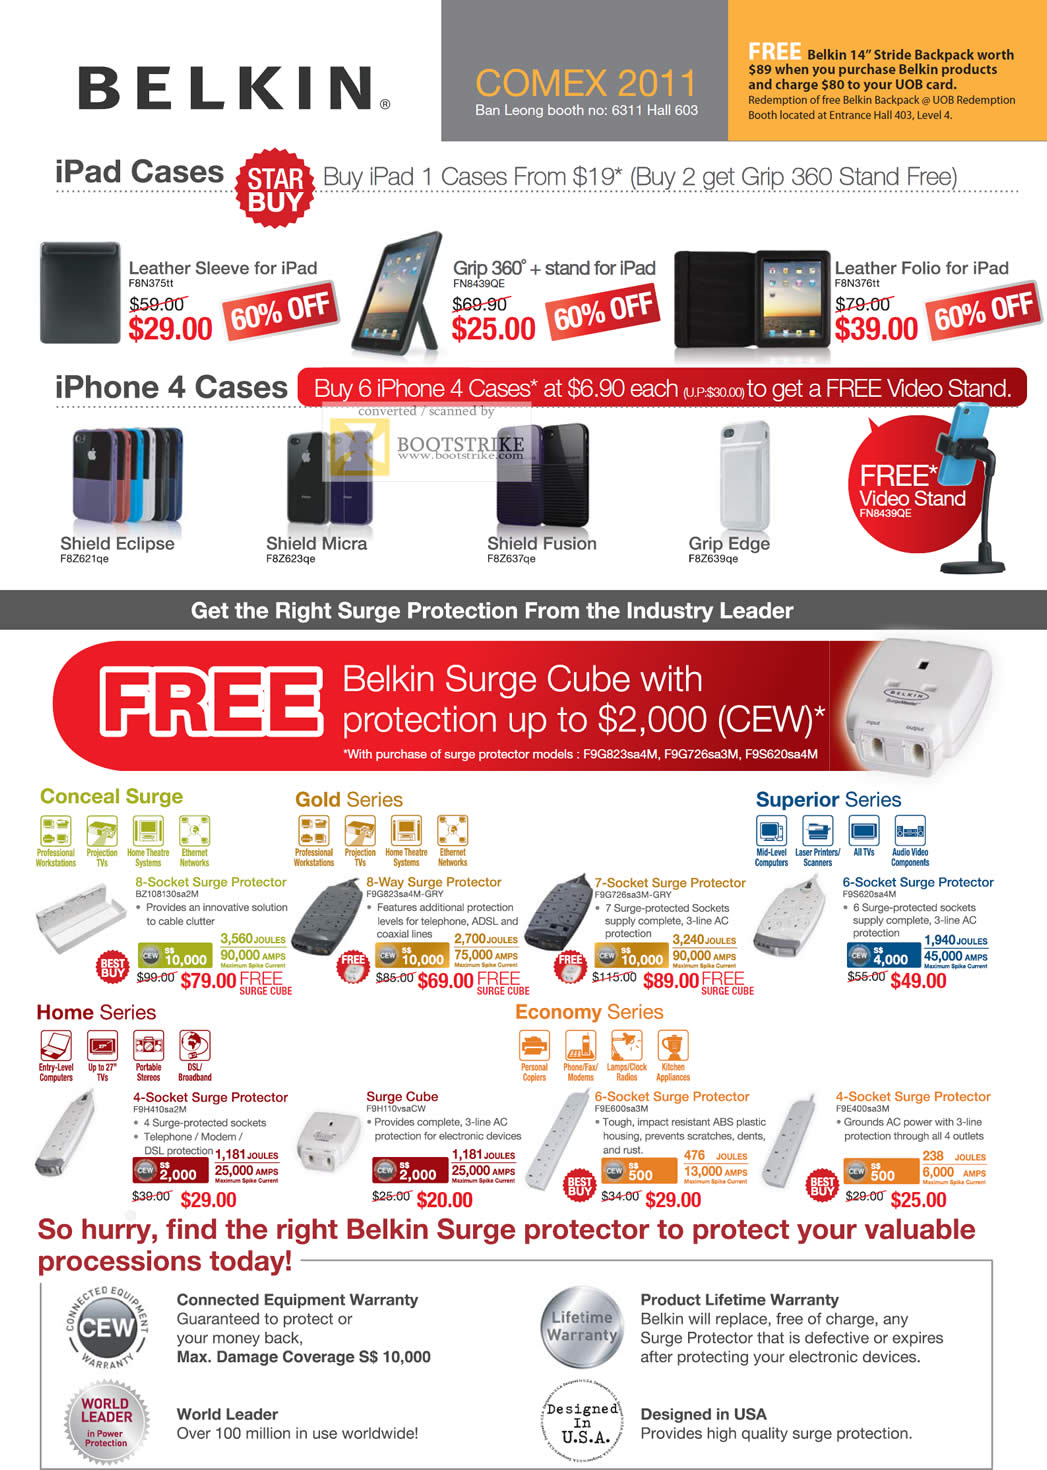 COMEX 2011 price list image brochure of Belkin IPad Case IPhone 4 Grip 360 Stand Leather Folio Surge Protector Conceal Surge Gold Home Cube Superior Economy